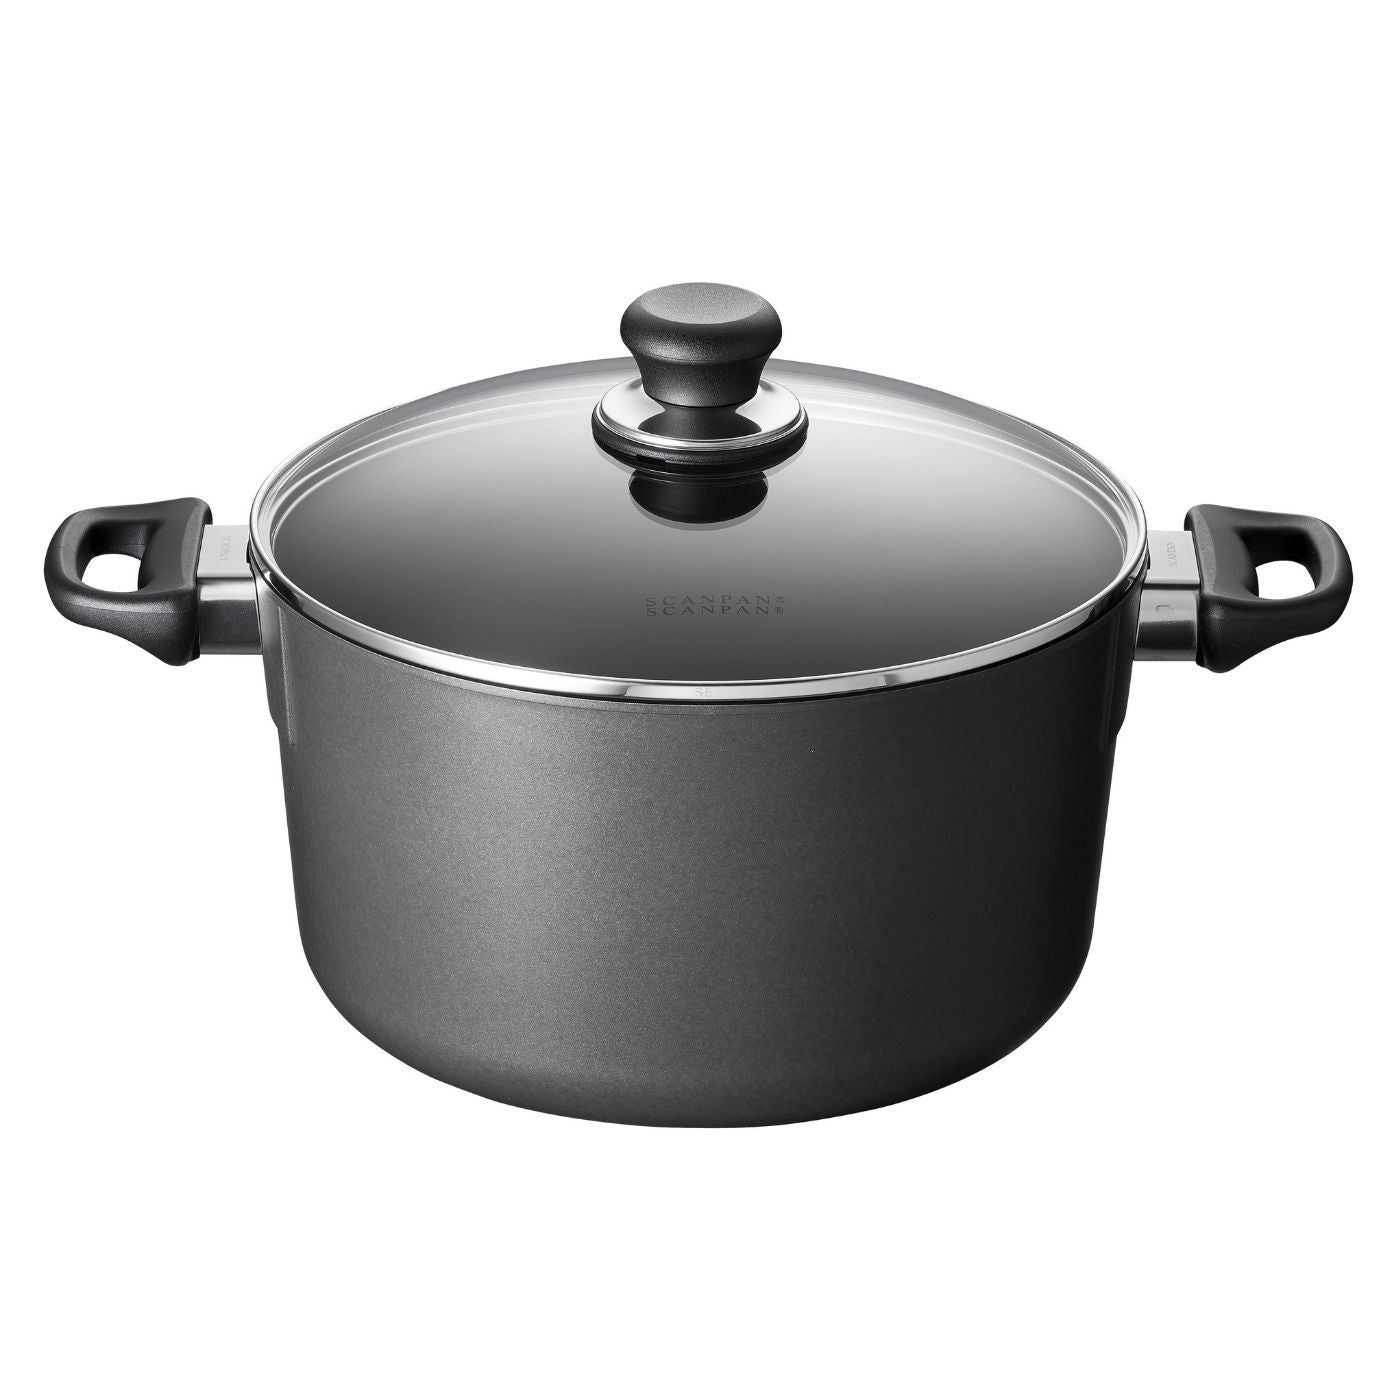 Scanpan Non Stick Classic Induction Casserole with Glass Lid - 26cm